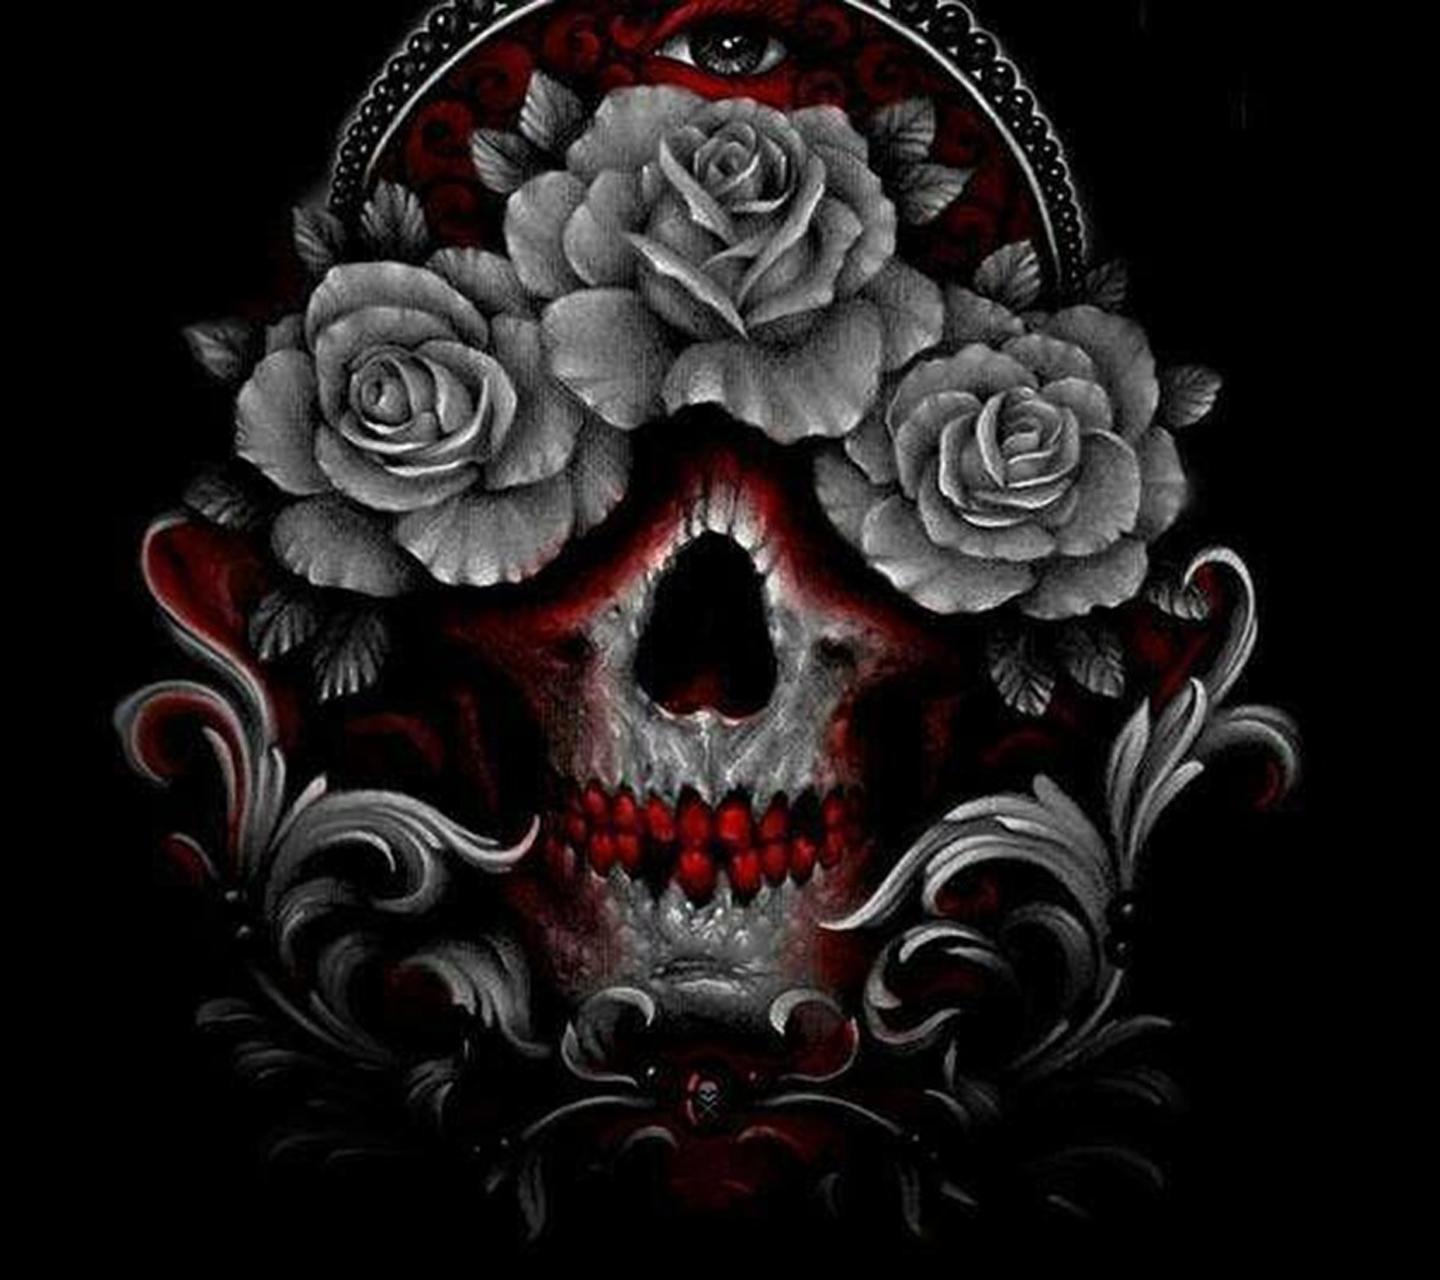 3D Skulls and Roses Wallpaper Free 3D Skulls and Roses Background